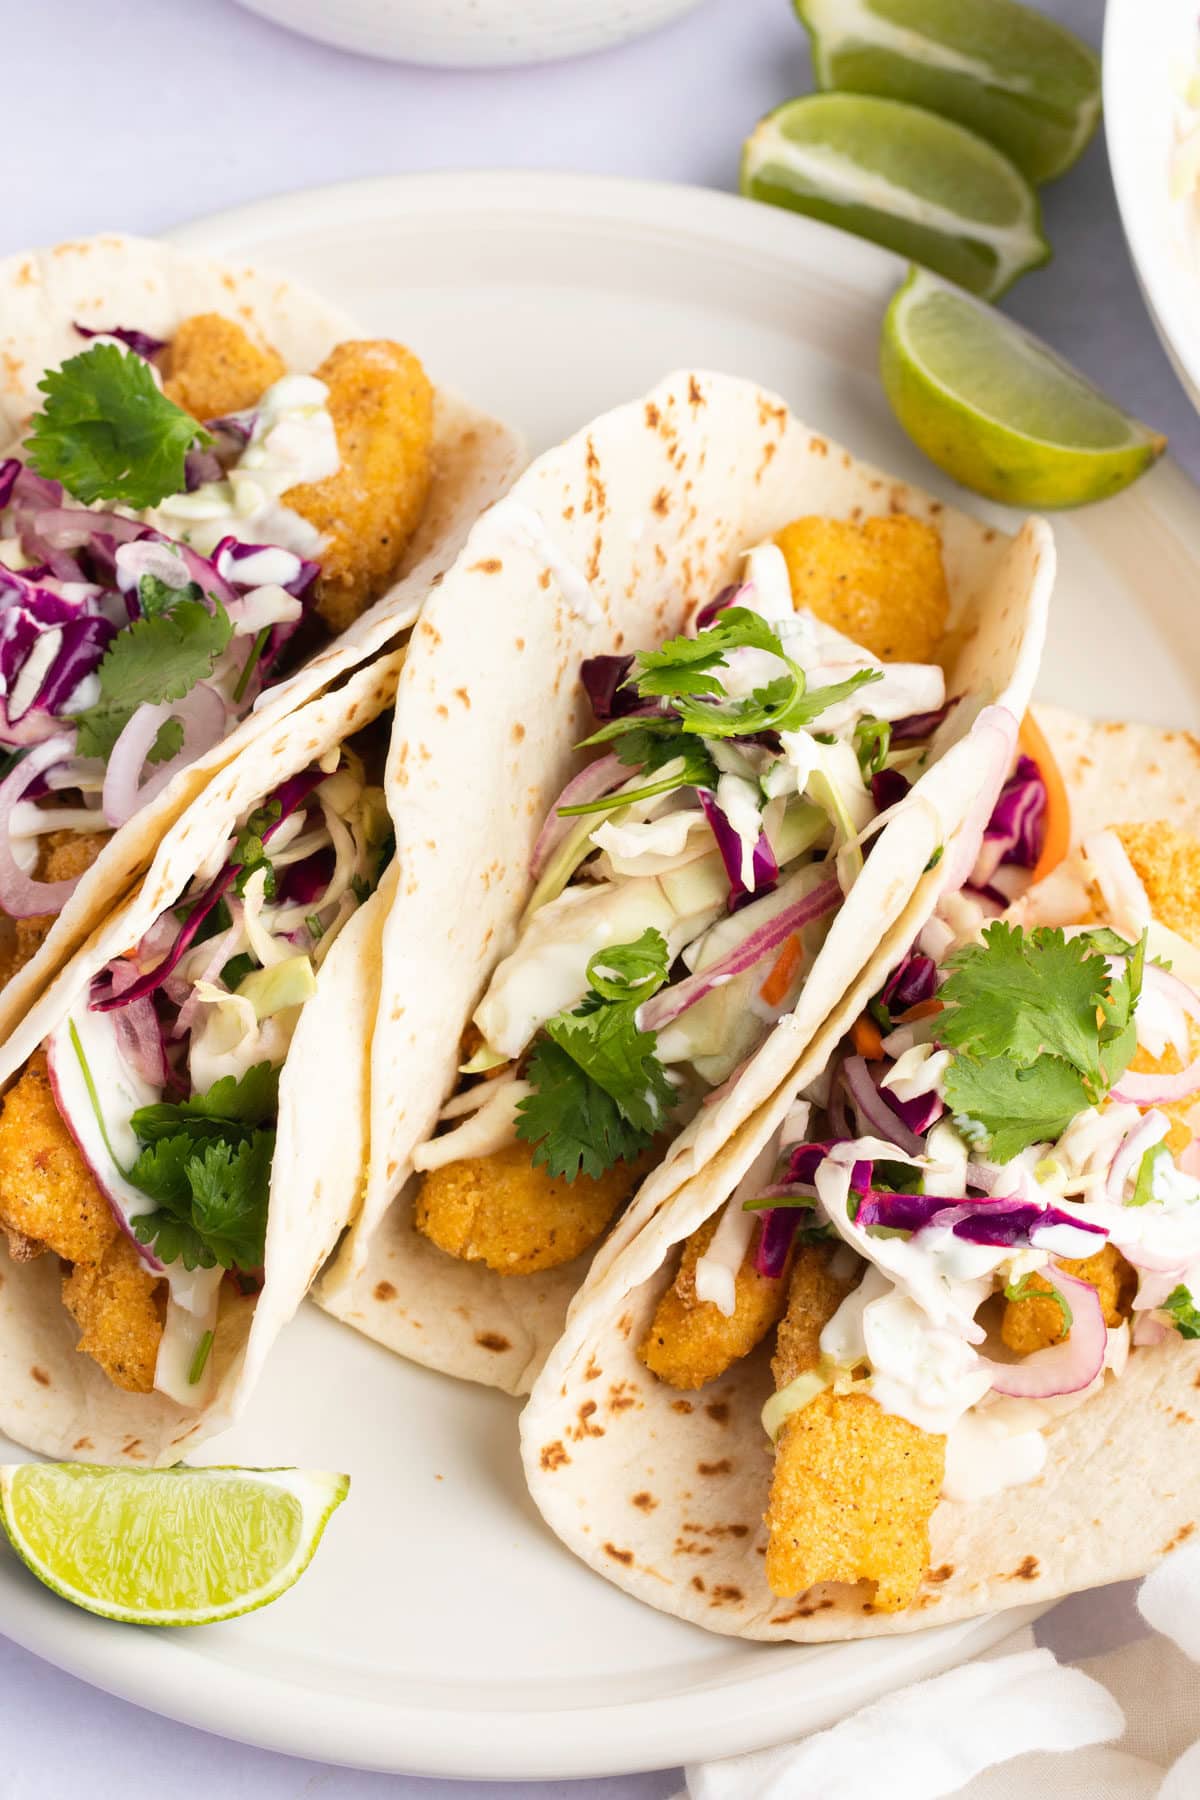 Four air fryer fish tacos served on a plate with fresh cilantro and lime wedges.